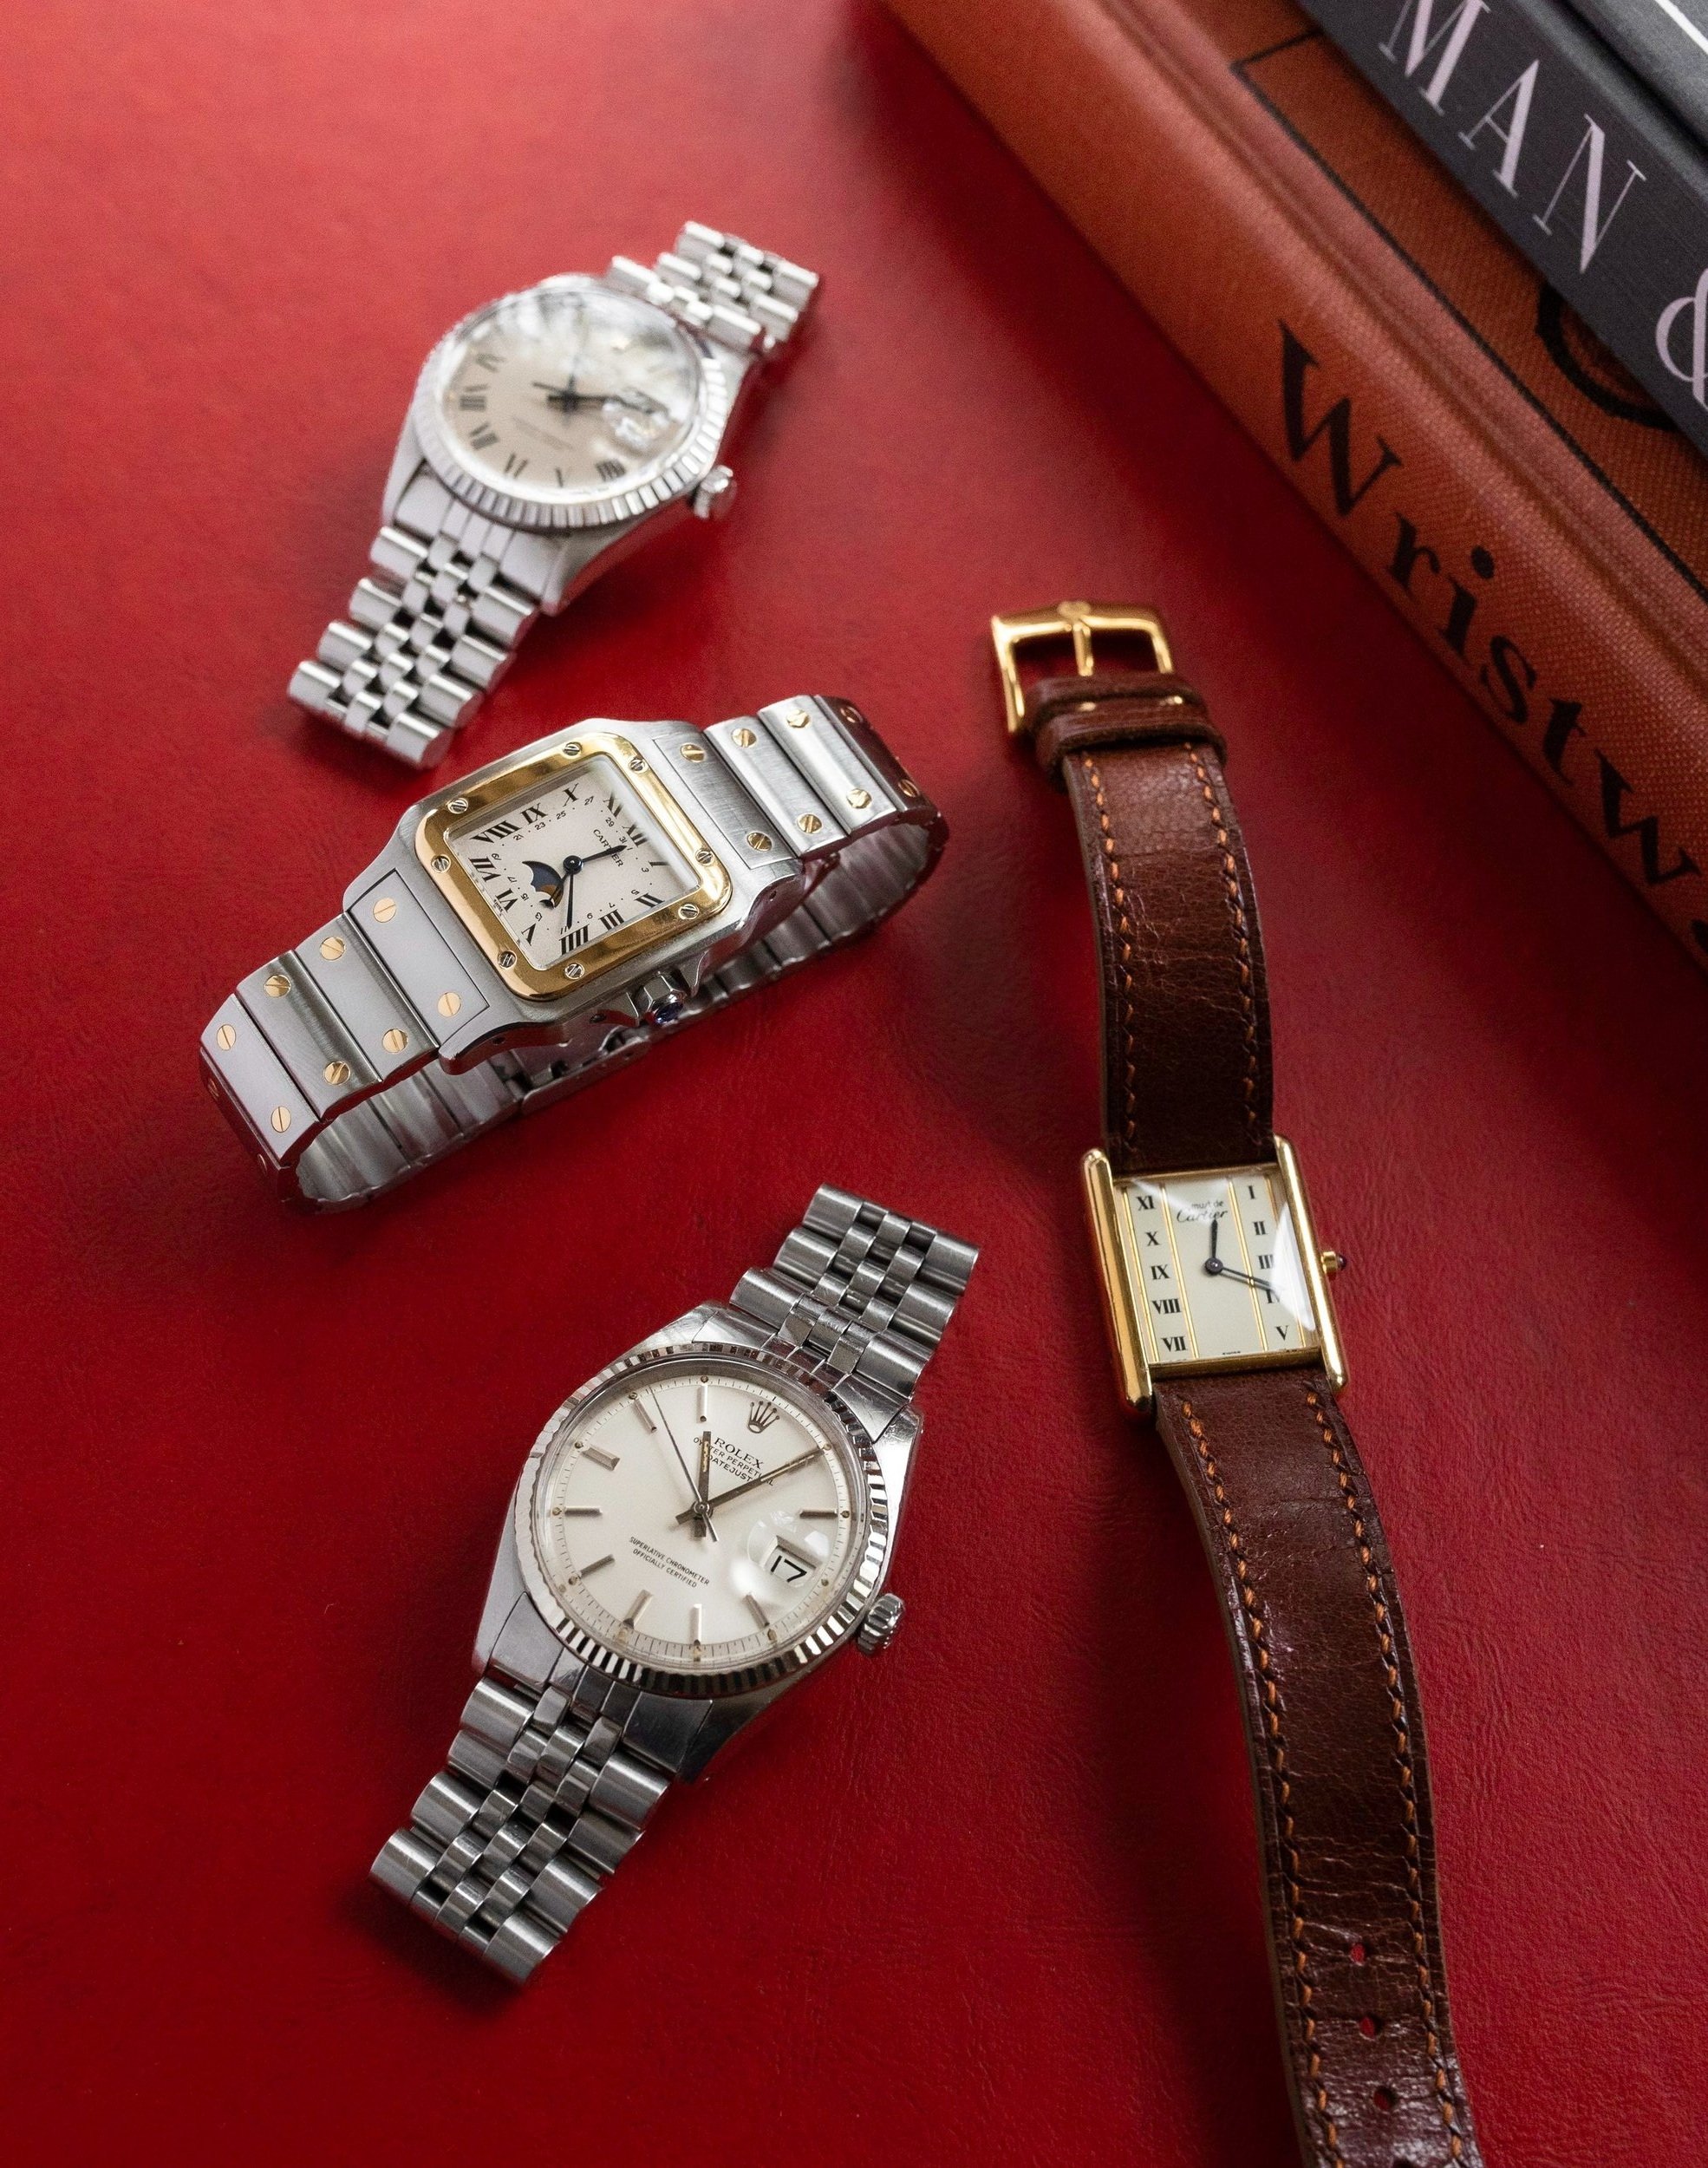 Vintage Watches for sale in NYC - Ashton-Blakey Vintage Watches-hkpdtq2012.edu.vn